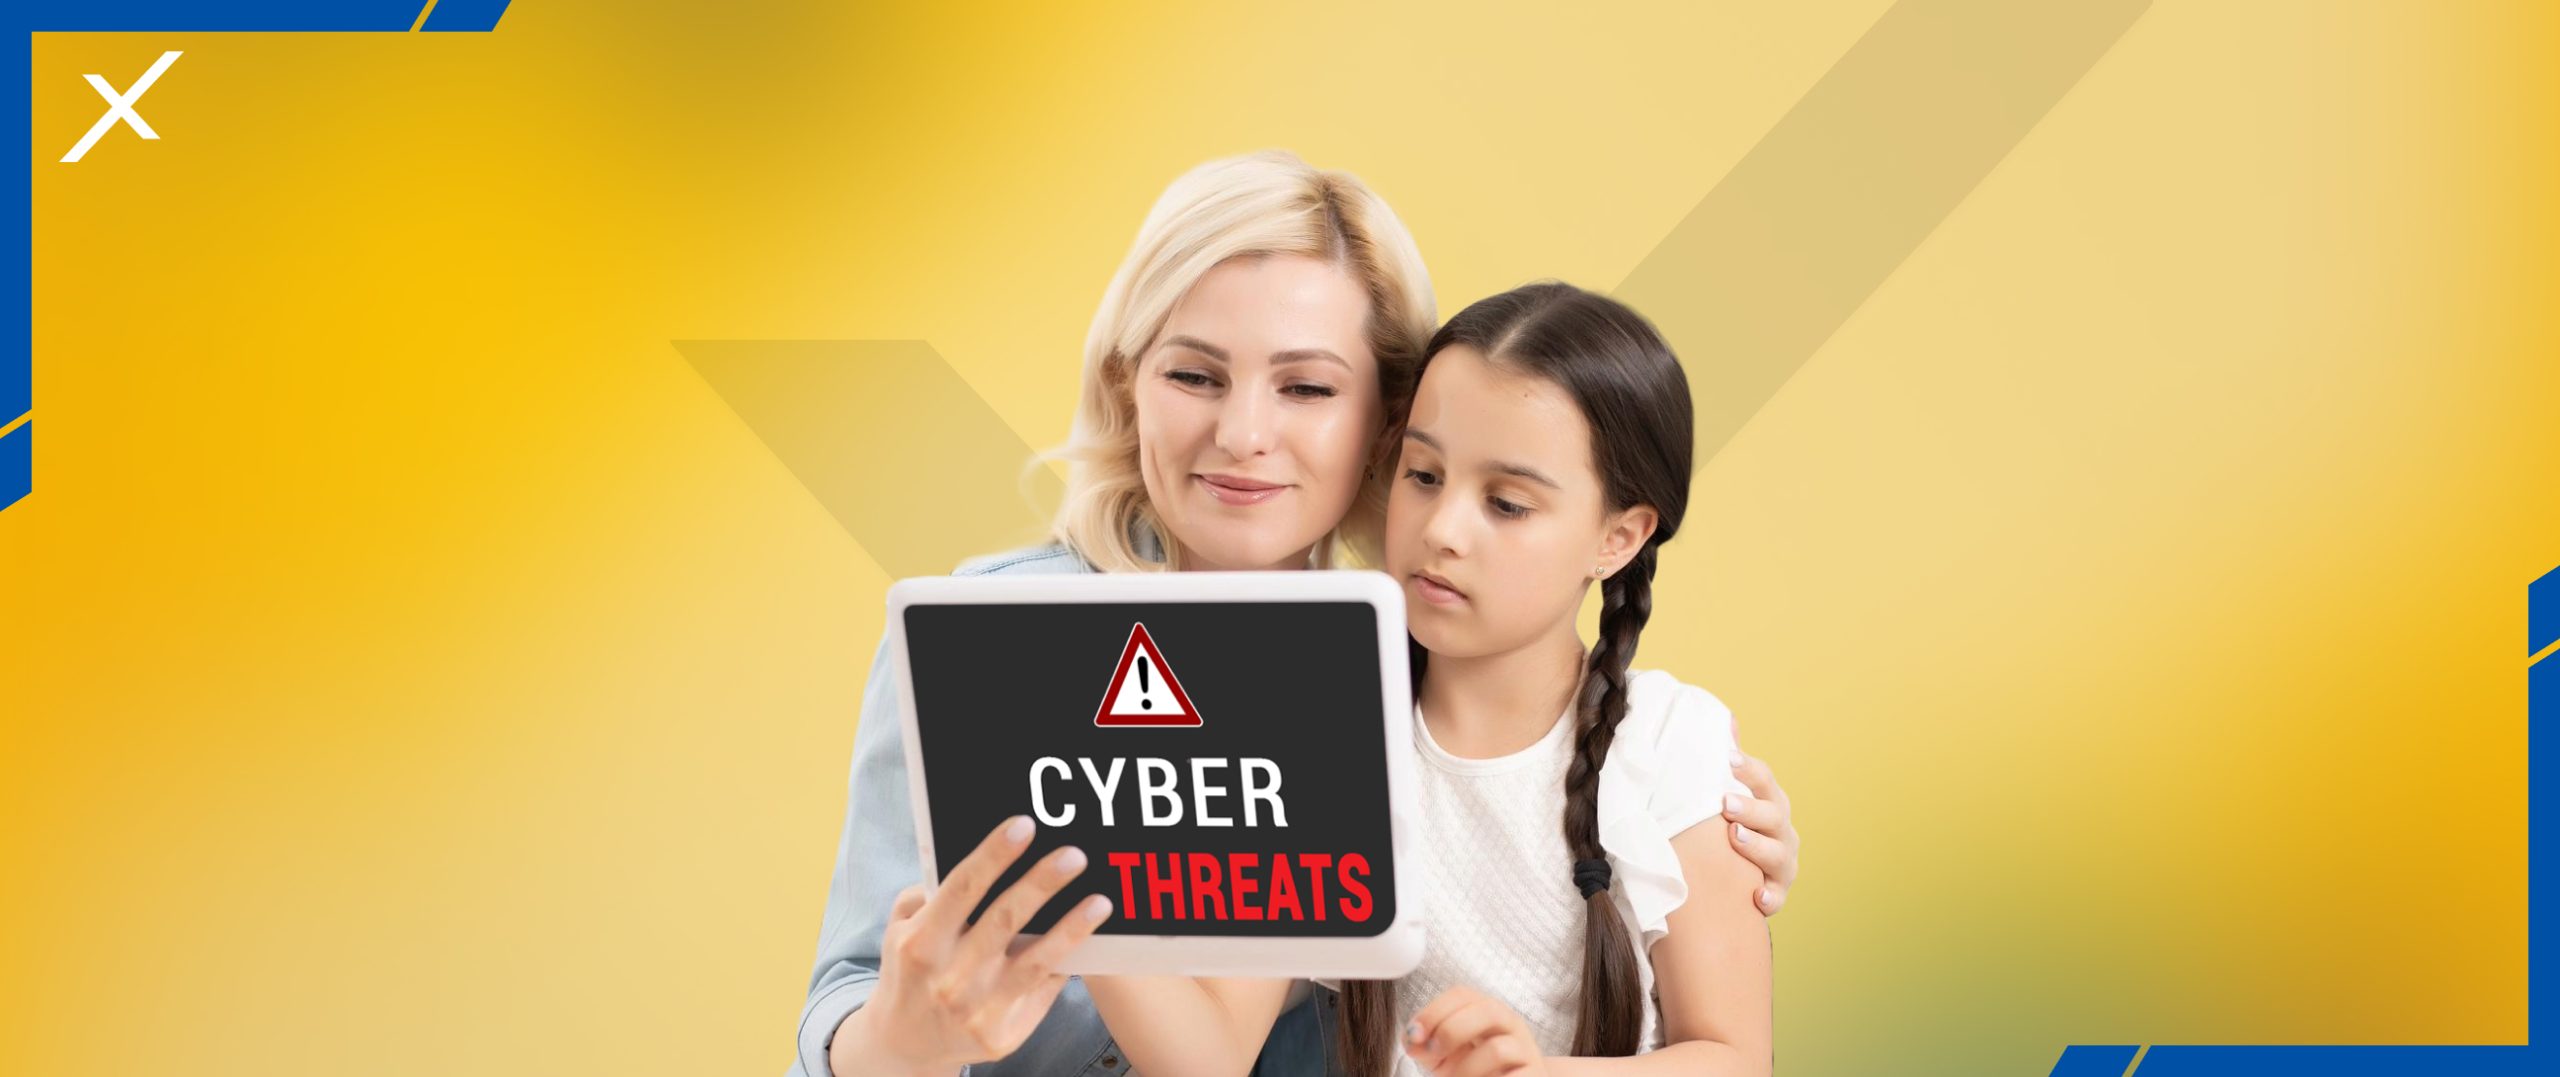  Importance of Discussing Cyber Threats with Kids